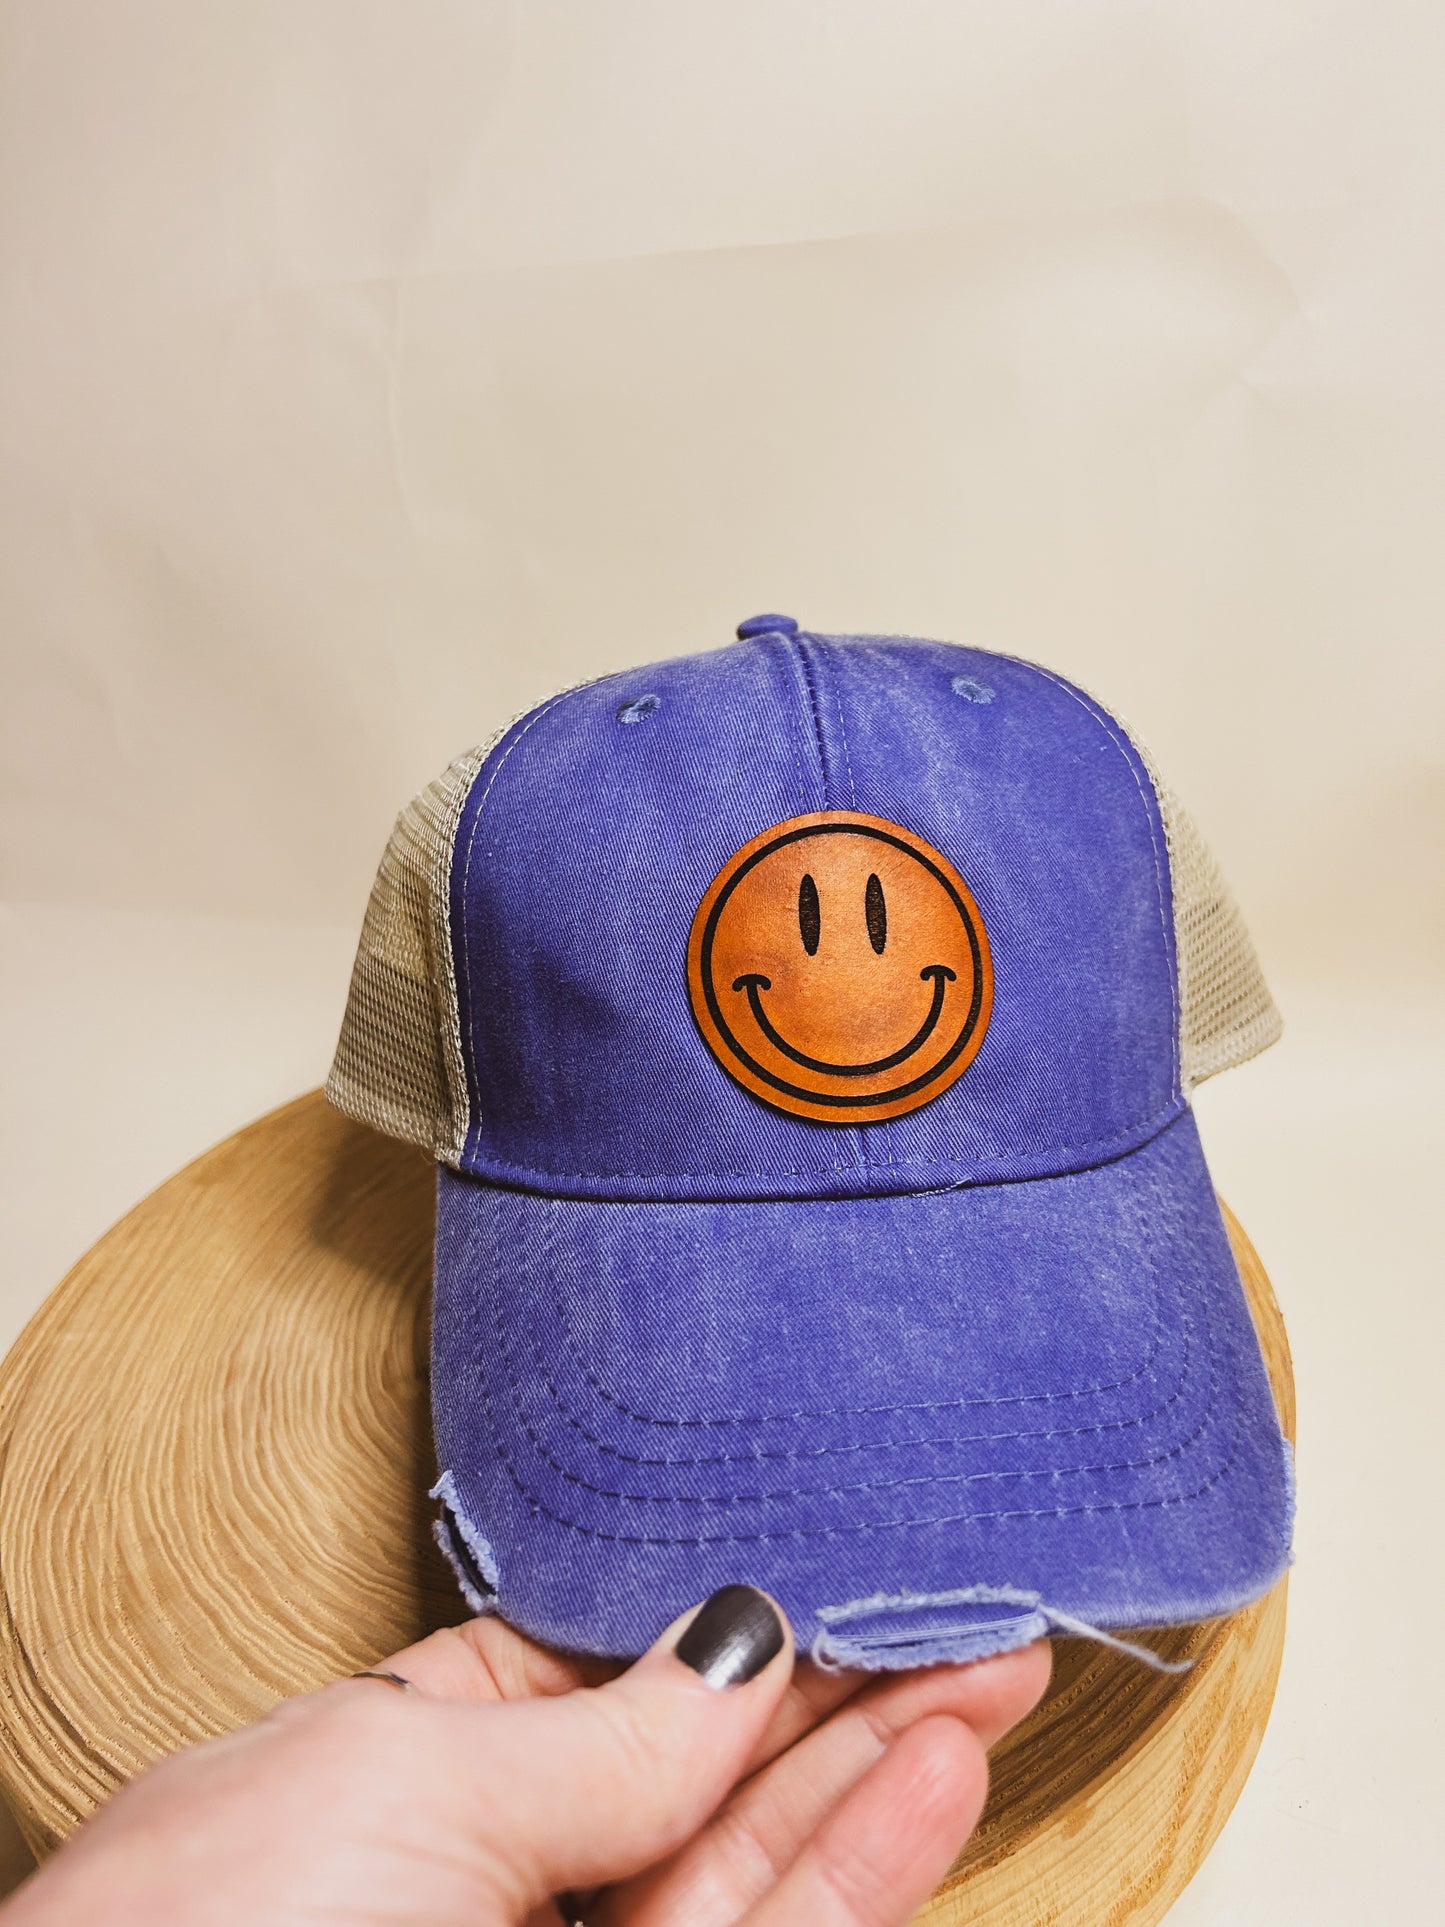 Happy Hat Patch on Distressed Hat